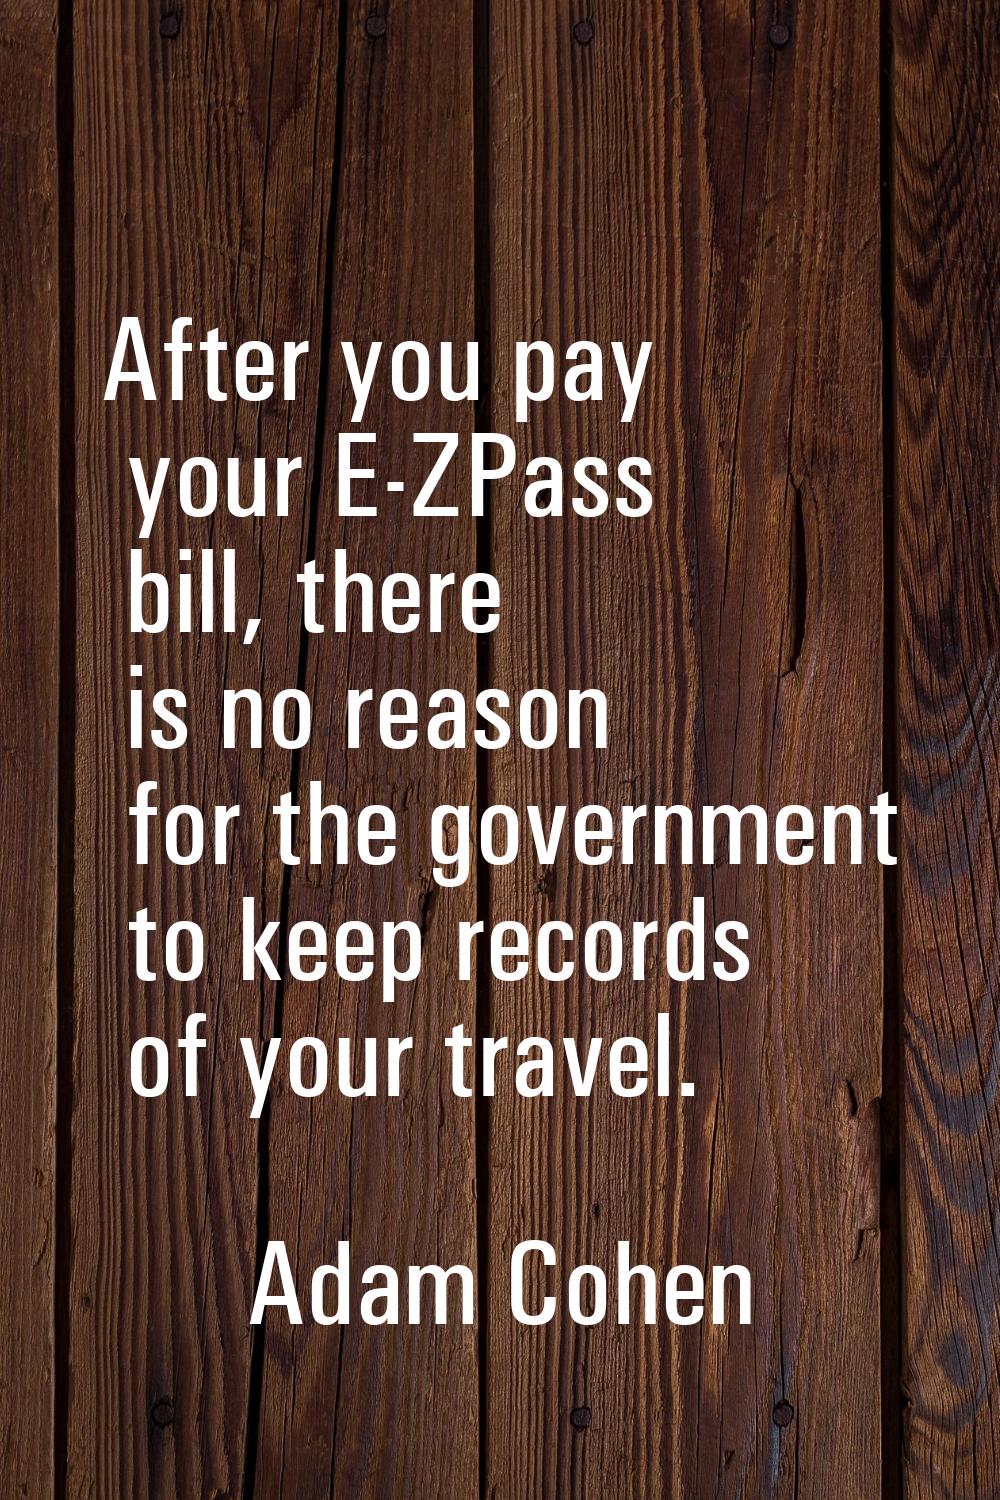 After you pay your E-ZPass bill, there is no reason for the government to keep records of your trav